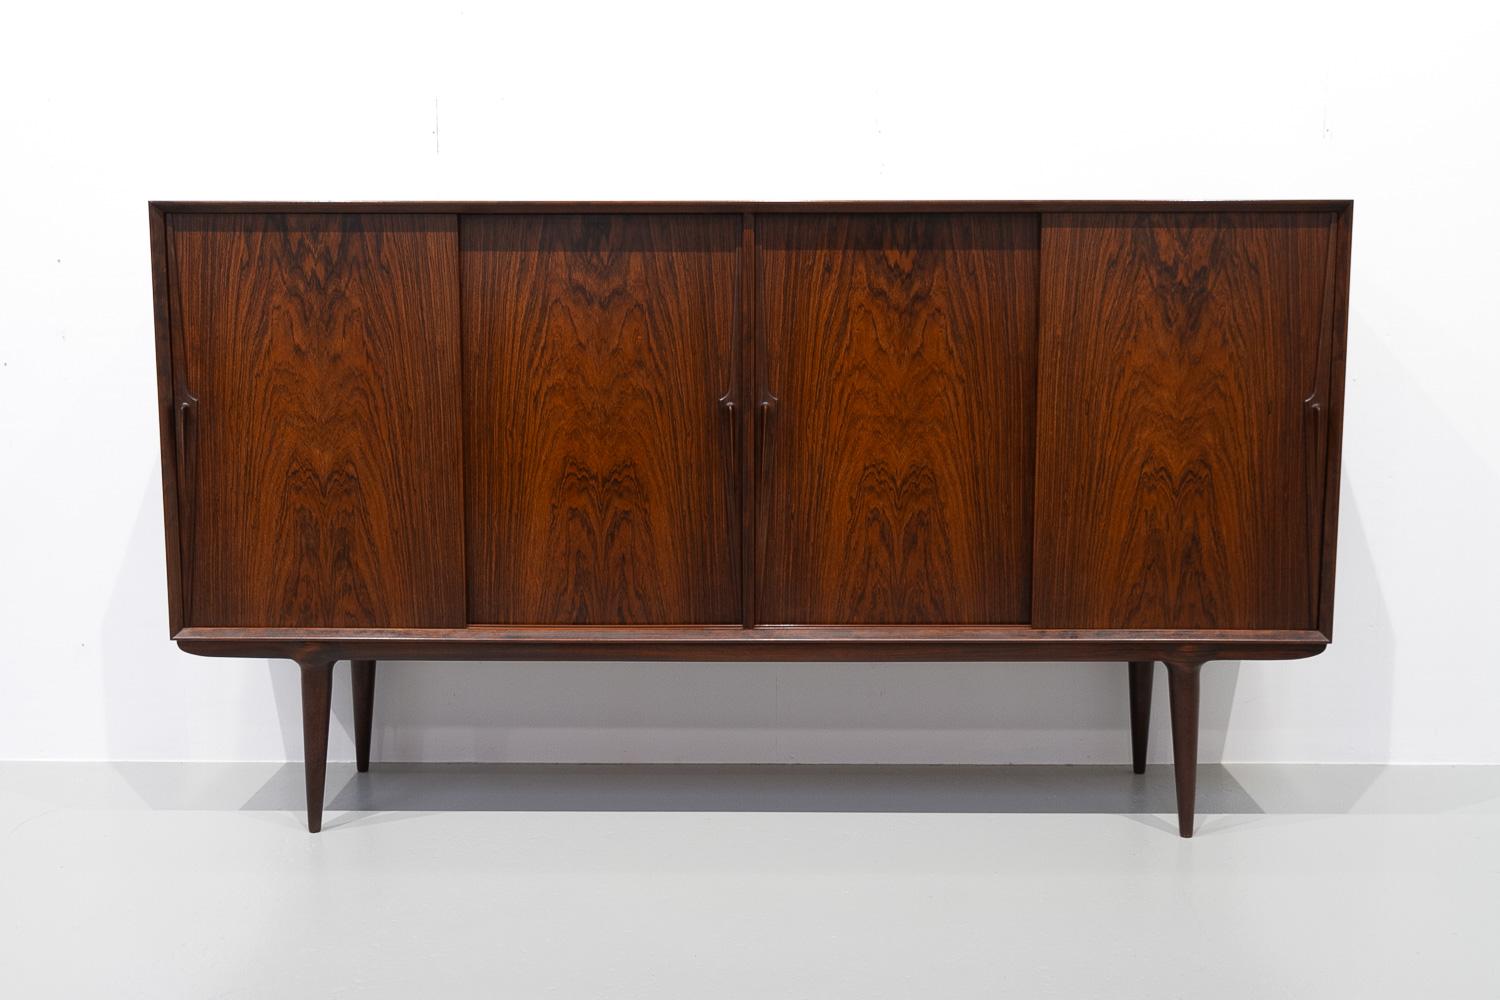 Vintage Danish Rosewood Sideboard by Gunni Omann for Omann Jun's Møbelfabrik, 1960s.
Large and spacious rosewood/palisander high board model no. 19 designed by Gunni Omann for Omann Jun A/S, Denmark.

Very high quality and craftsmanship. Many